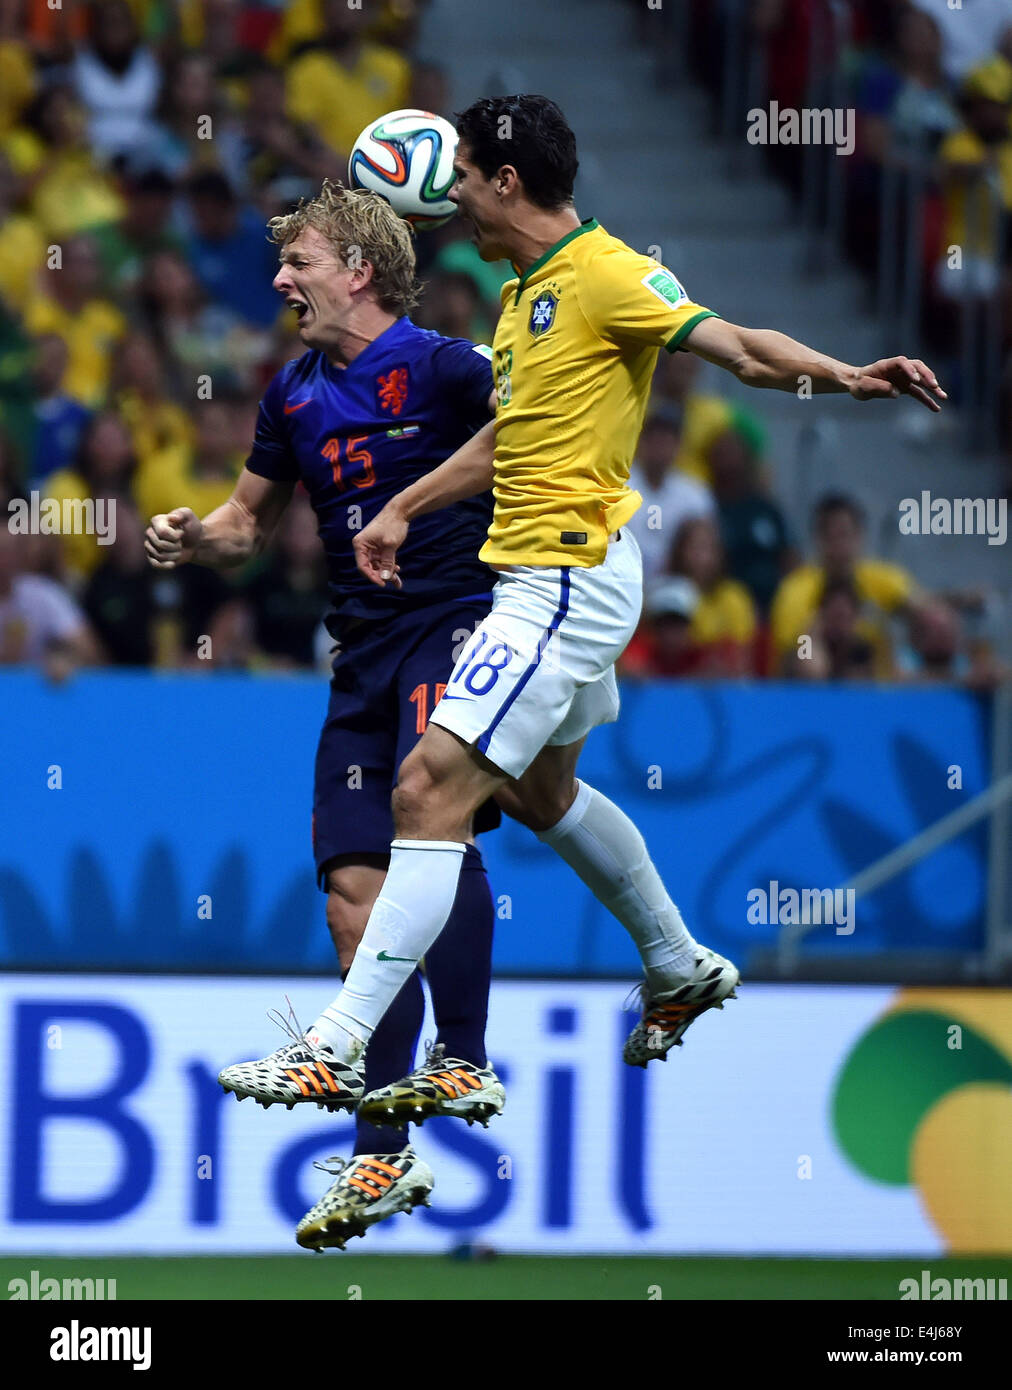 Brasilia, Brazil. 12th July, 2014. Netherlands' Dirk Kuyt (L) vies with Brazil's Hernanes during the third place play-off match between Brazil and Netherlands of 2014 FIFA World Cup at the Estadio Nacional Stadium in Brasilia, Brazil, on July 12, 2014. Netherlands won 3-0 over Brazil and took the third place of the tournament on Saturday. Credit:  Guo Yong/Xinhua/Alamy Live News Stock Photo